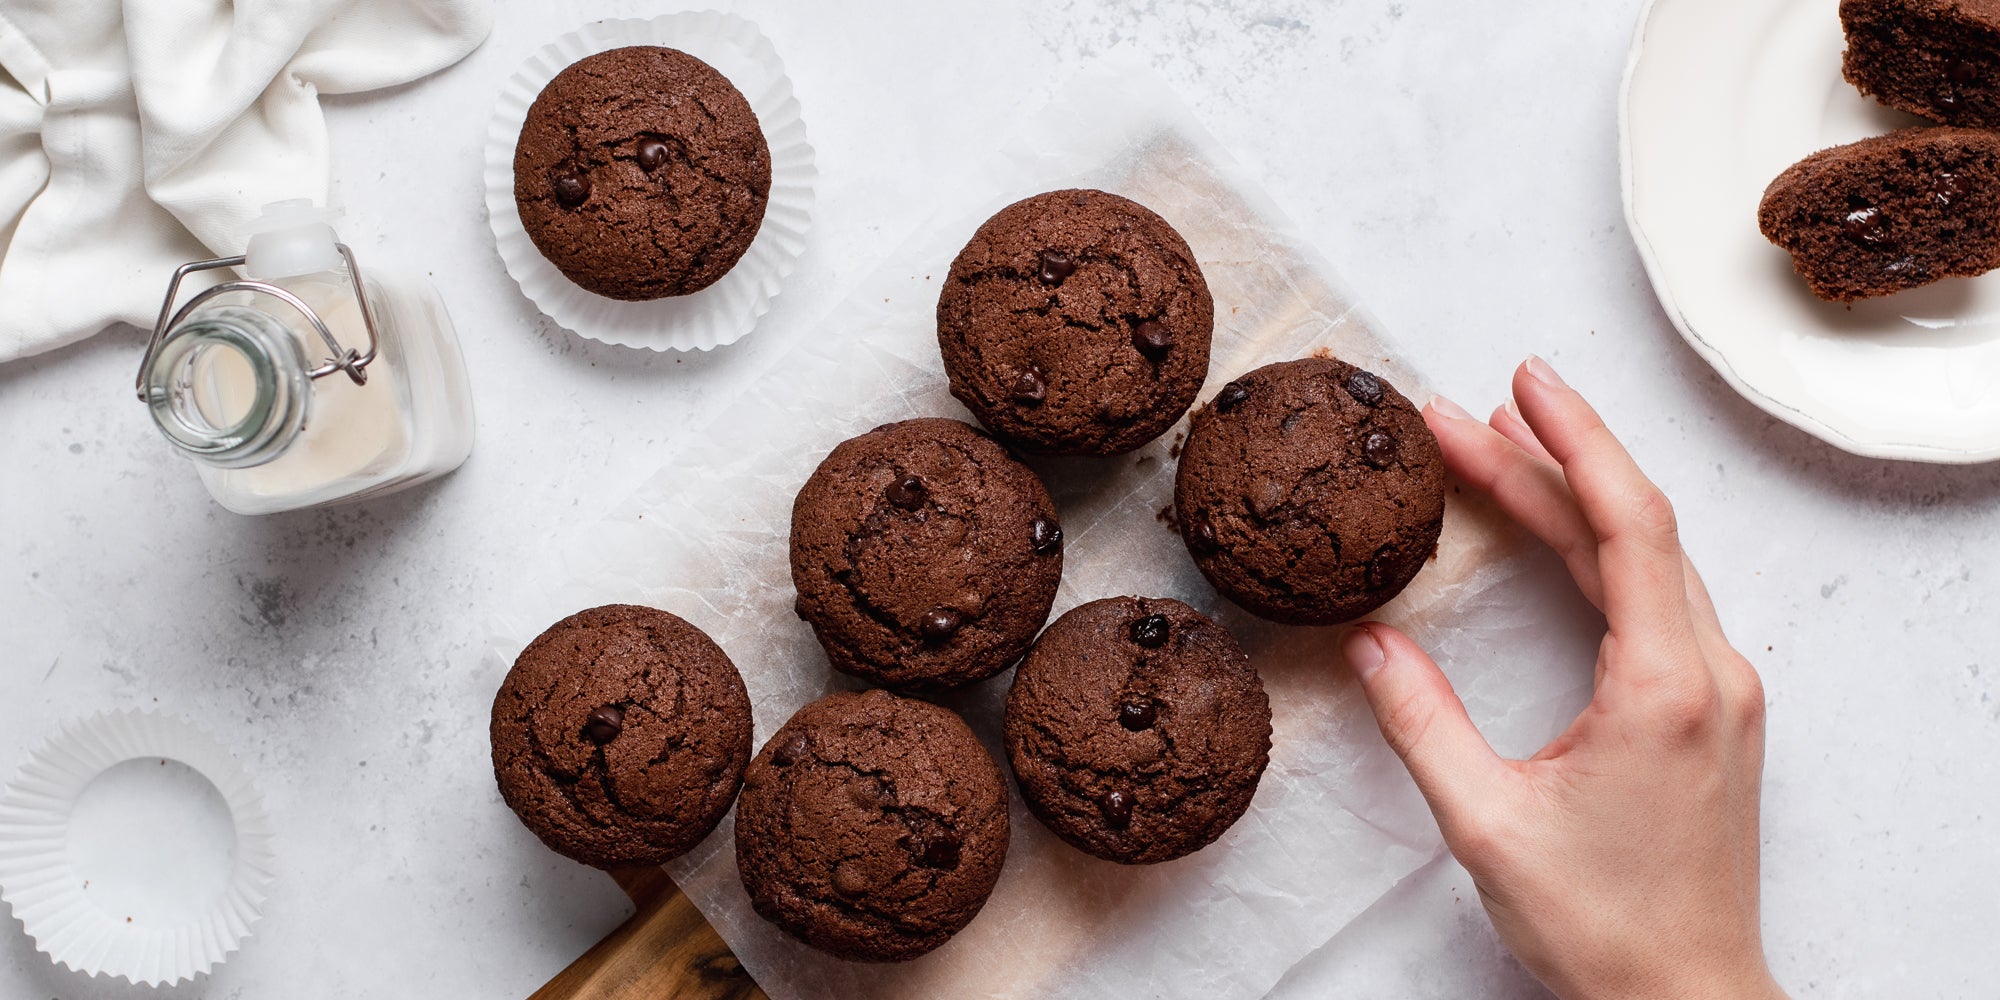 Gluten Free Chocolate Muffins with a hand reaching for a muffin next to a glass bottle of milk